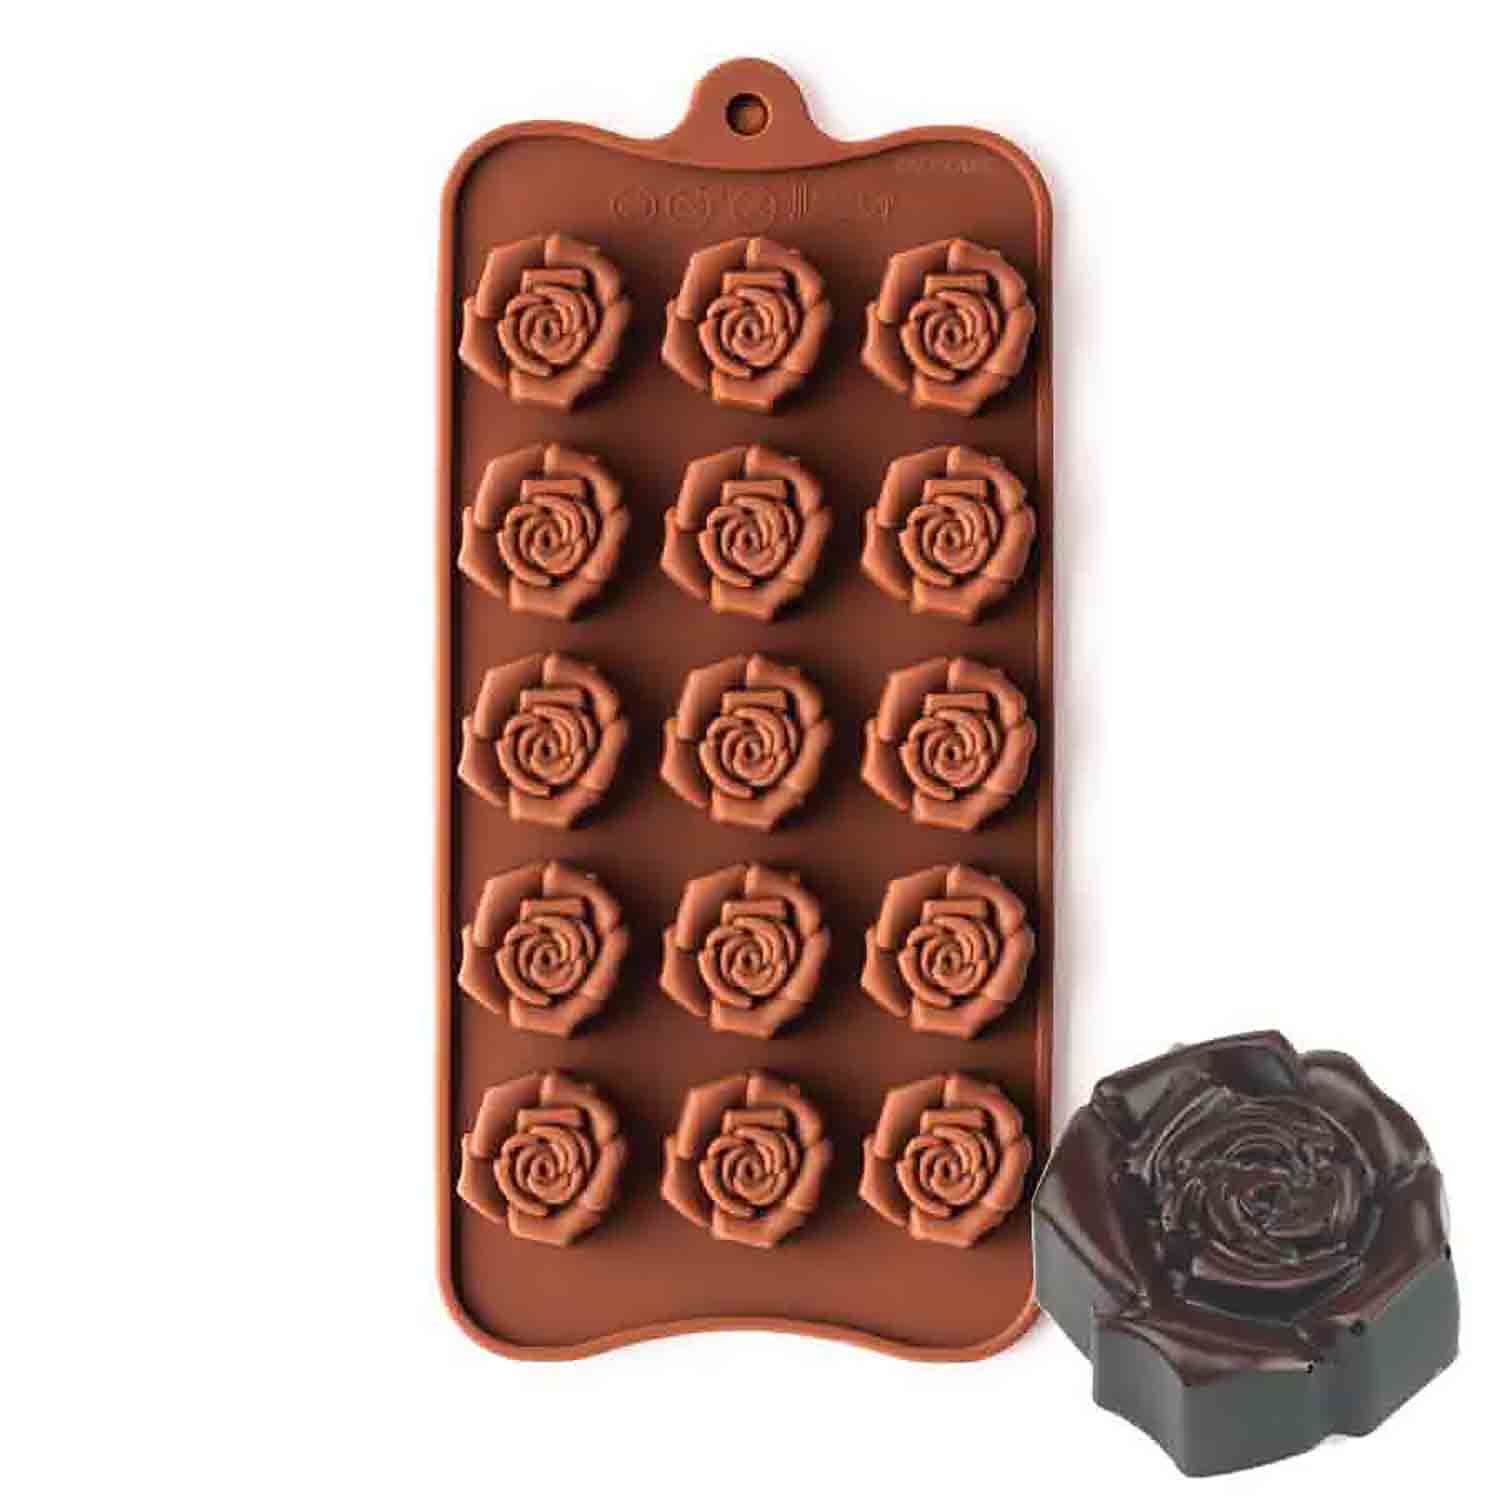 Open Rose Silicone Chocolate Candy Mold Ny Scm1337 Country Kitchen Sweetart